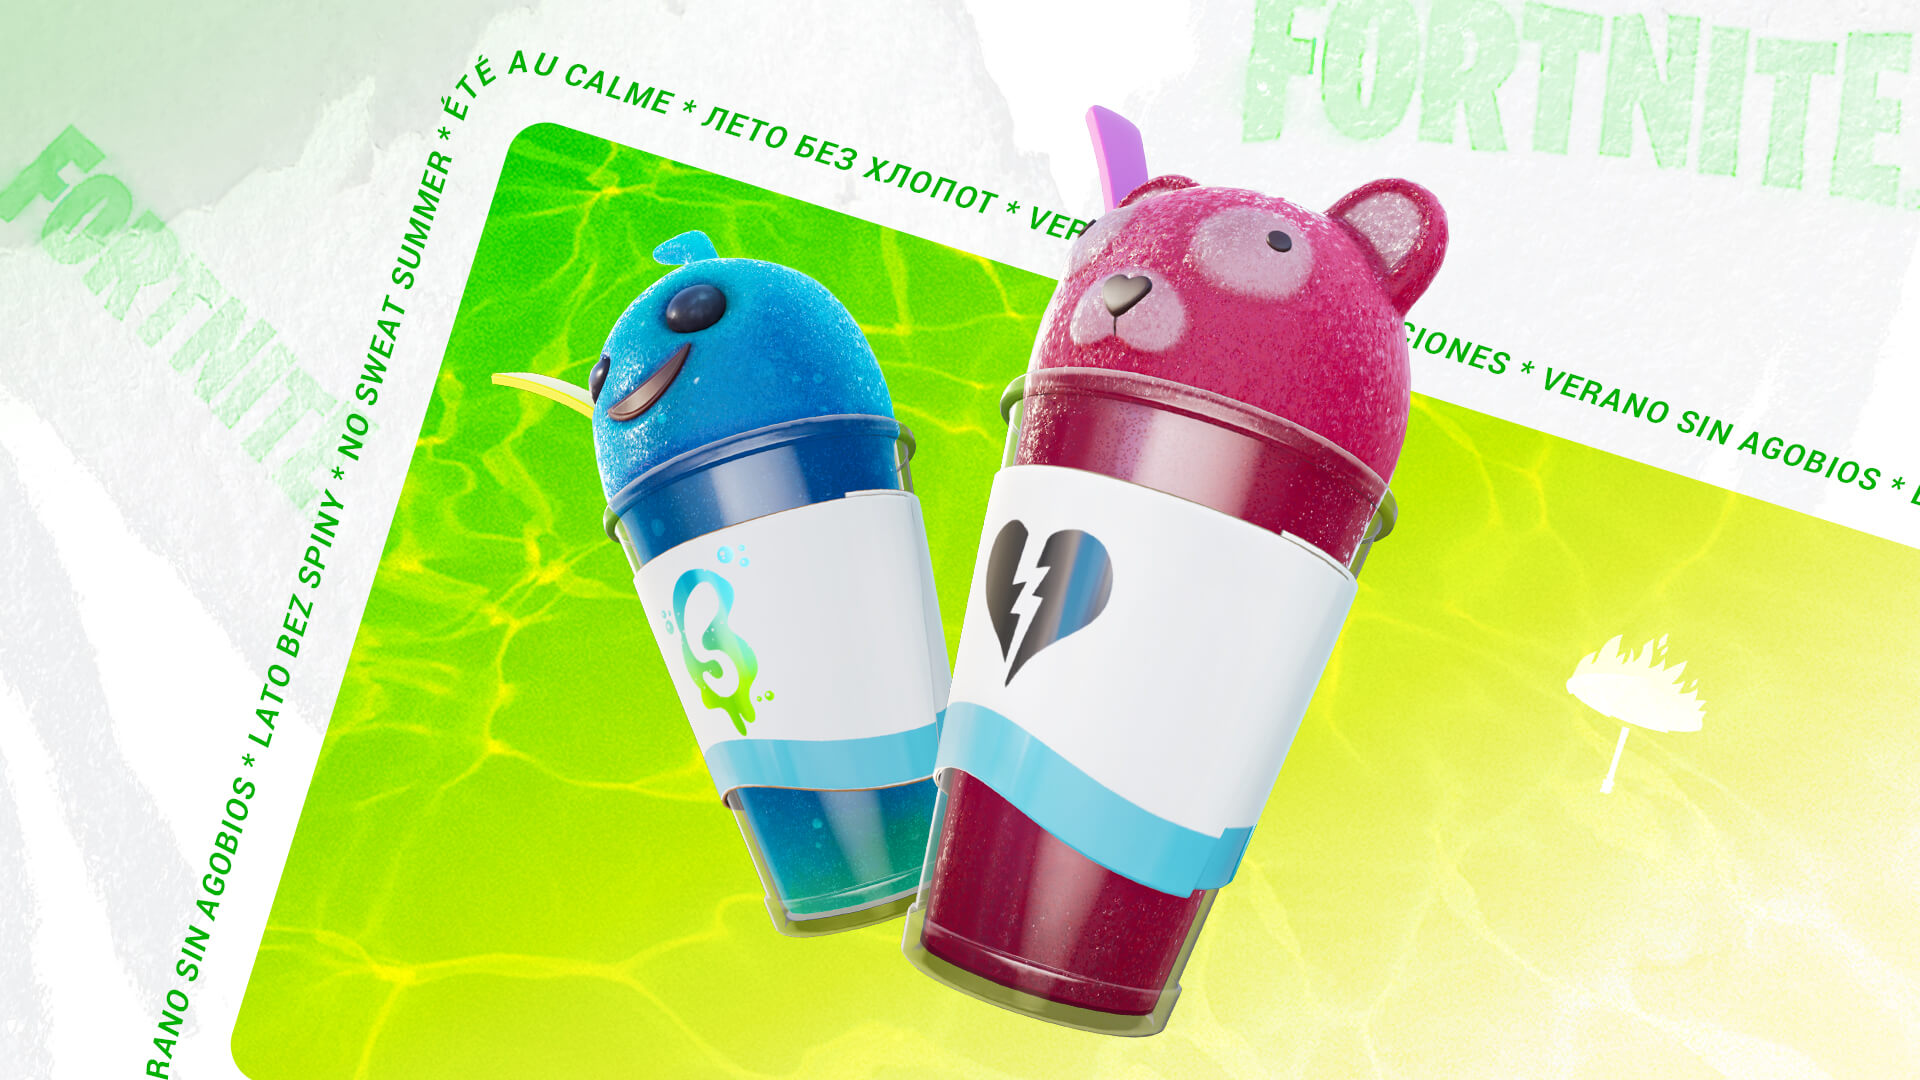 Find out how to participate in the Fortnite Carefree Summer event to earn free rewards by completing new quests.